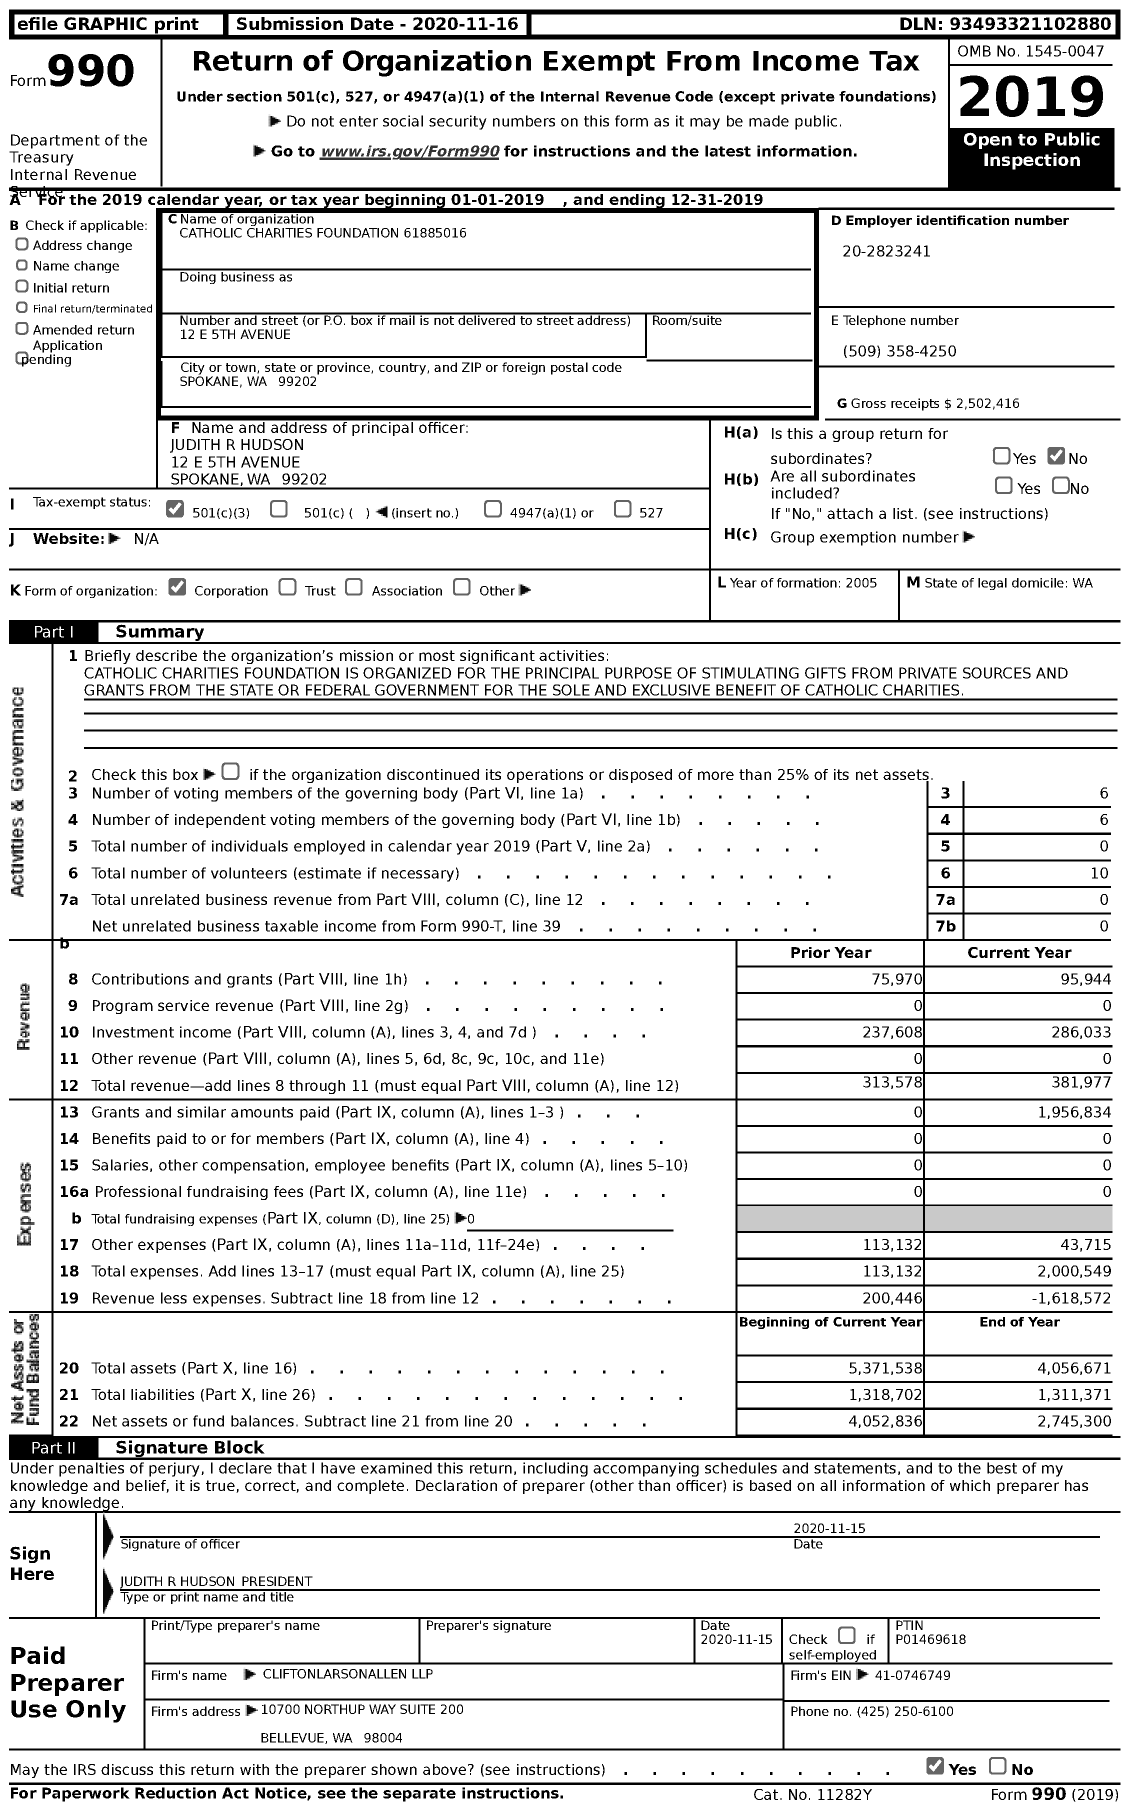 Image of first page of 2019 Form 990 for Catholic Charities Foundation 61885016